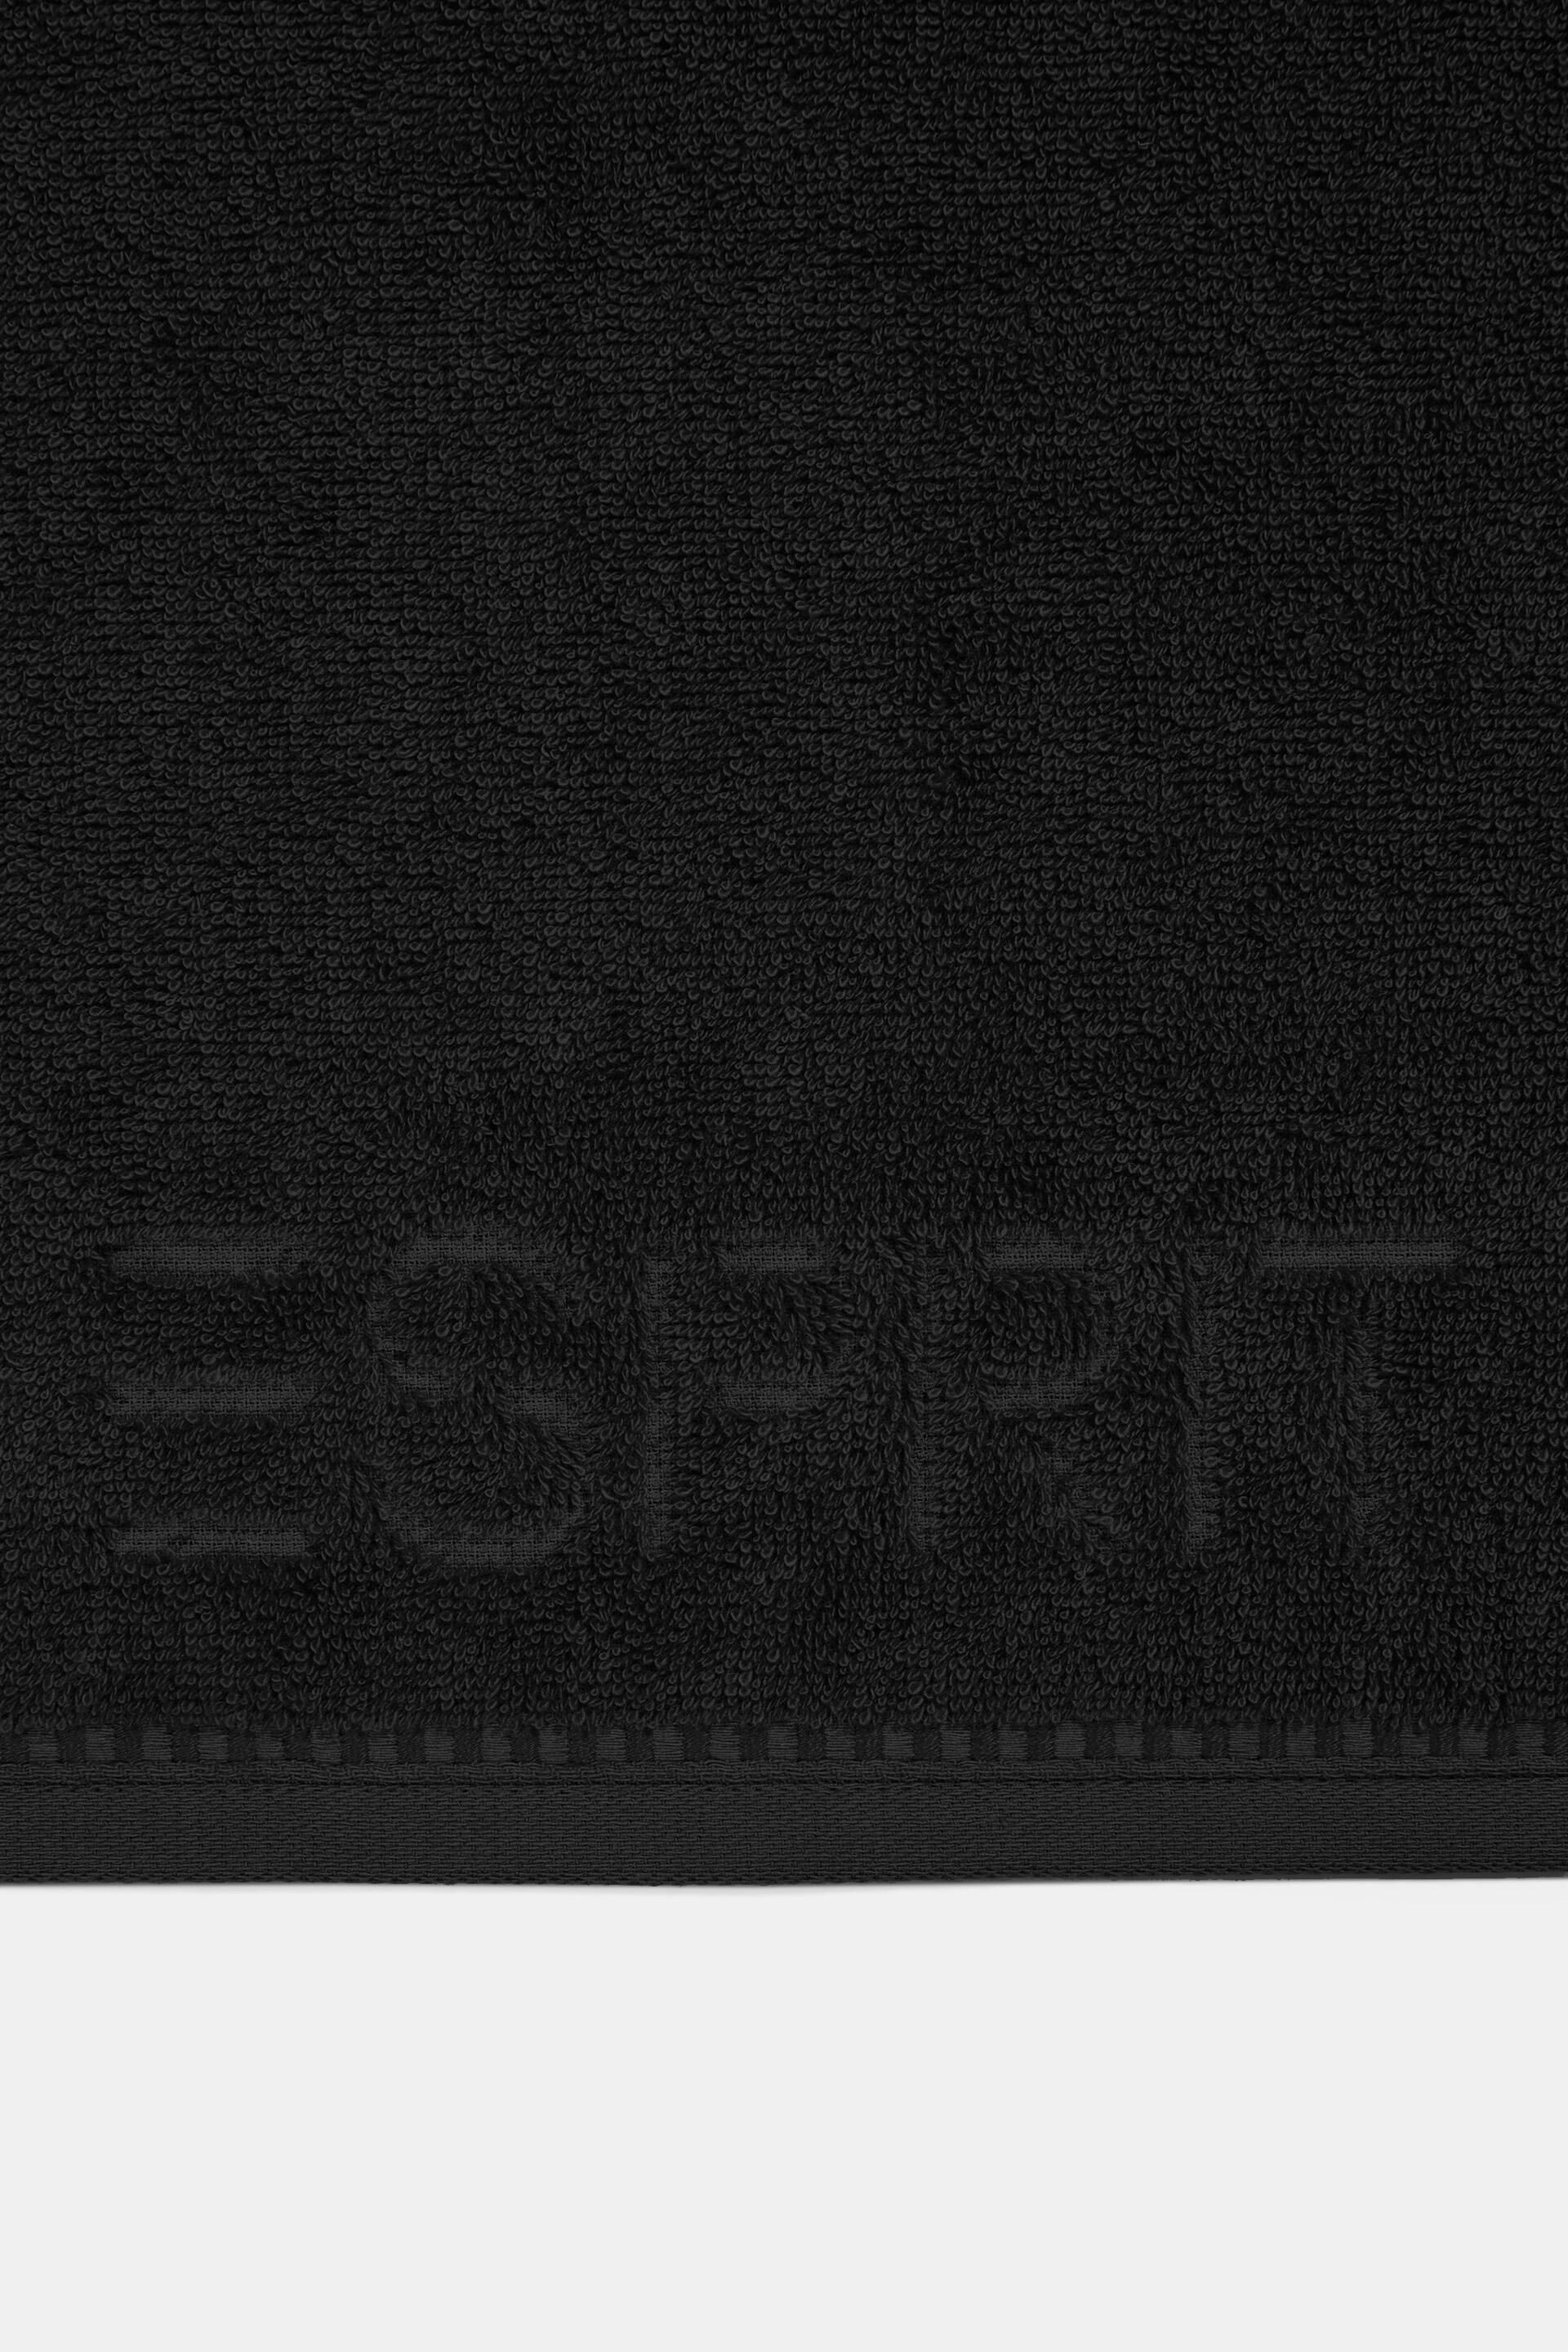 Esprit collection towel Terry cloth